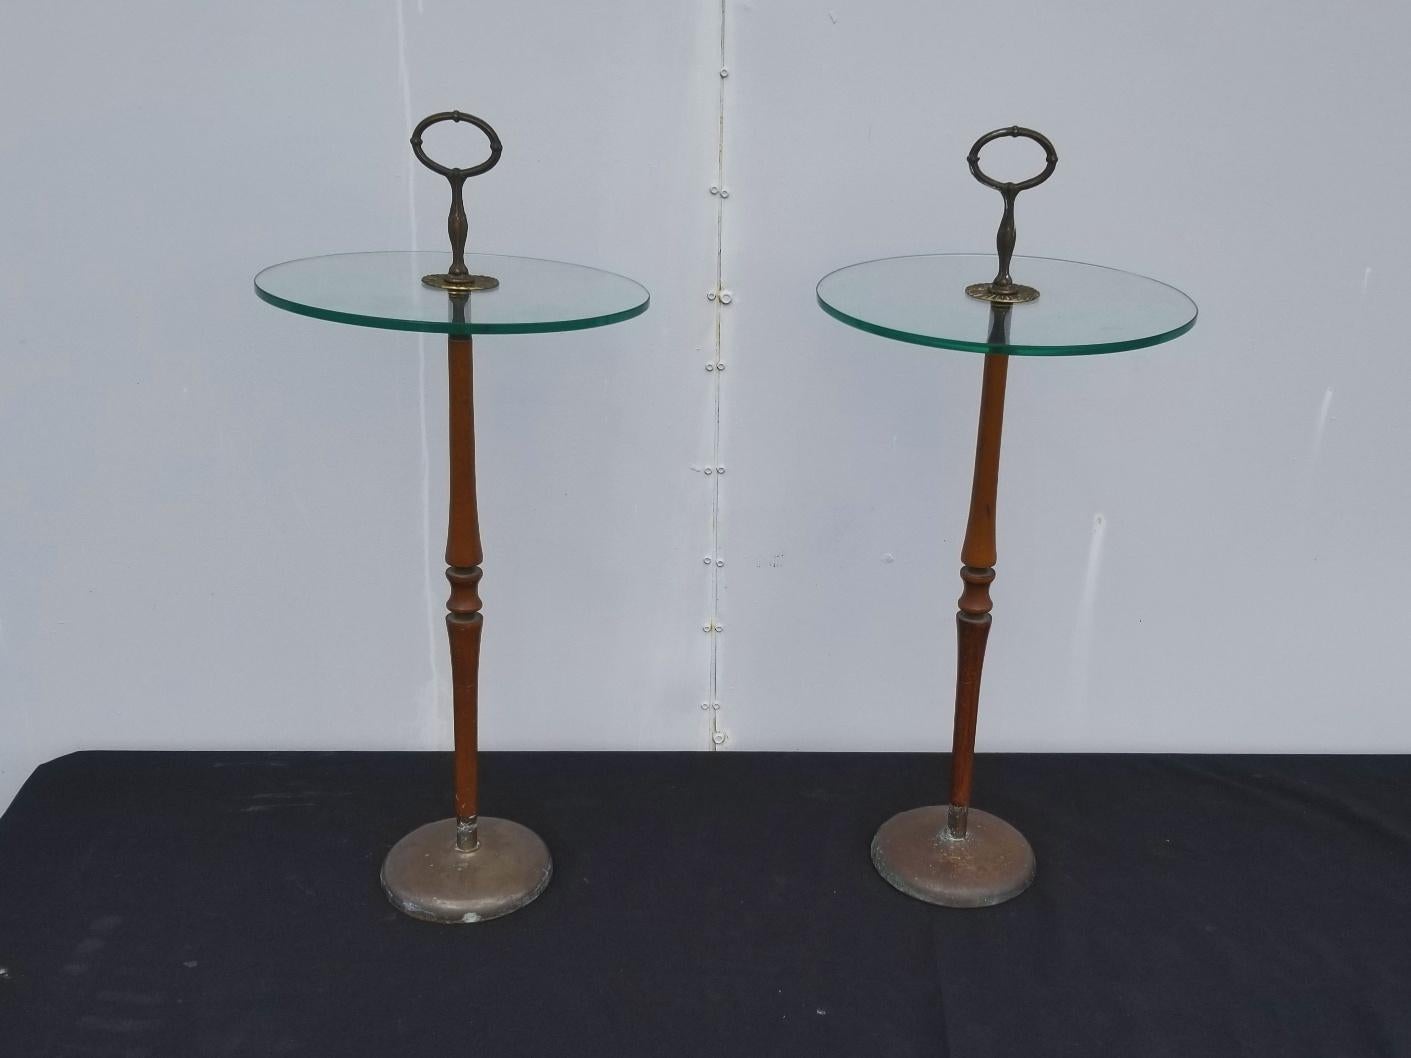 1950s pair of Italian side tables, glass top on the wood and brass base. Tables are in original condition.
Tables can be dismantle for easy shipping.